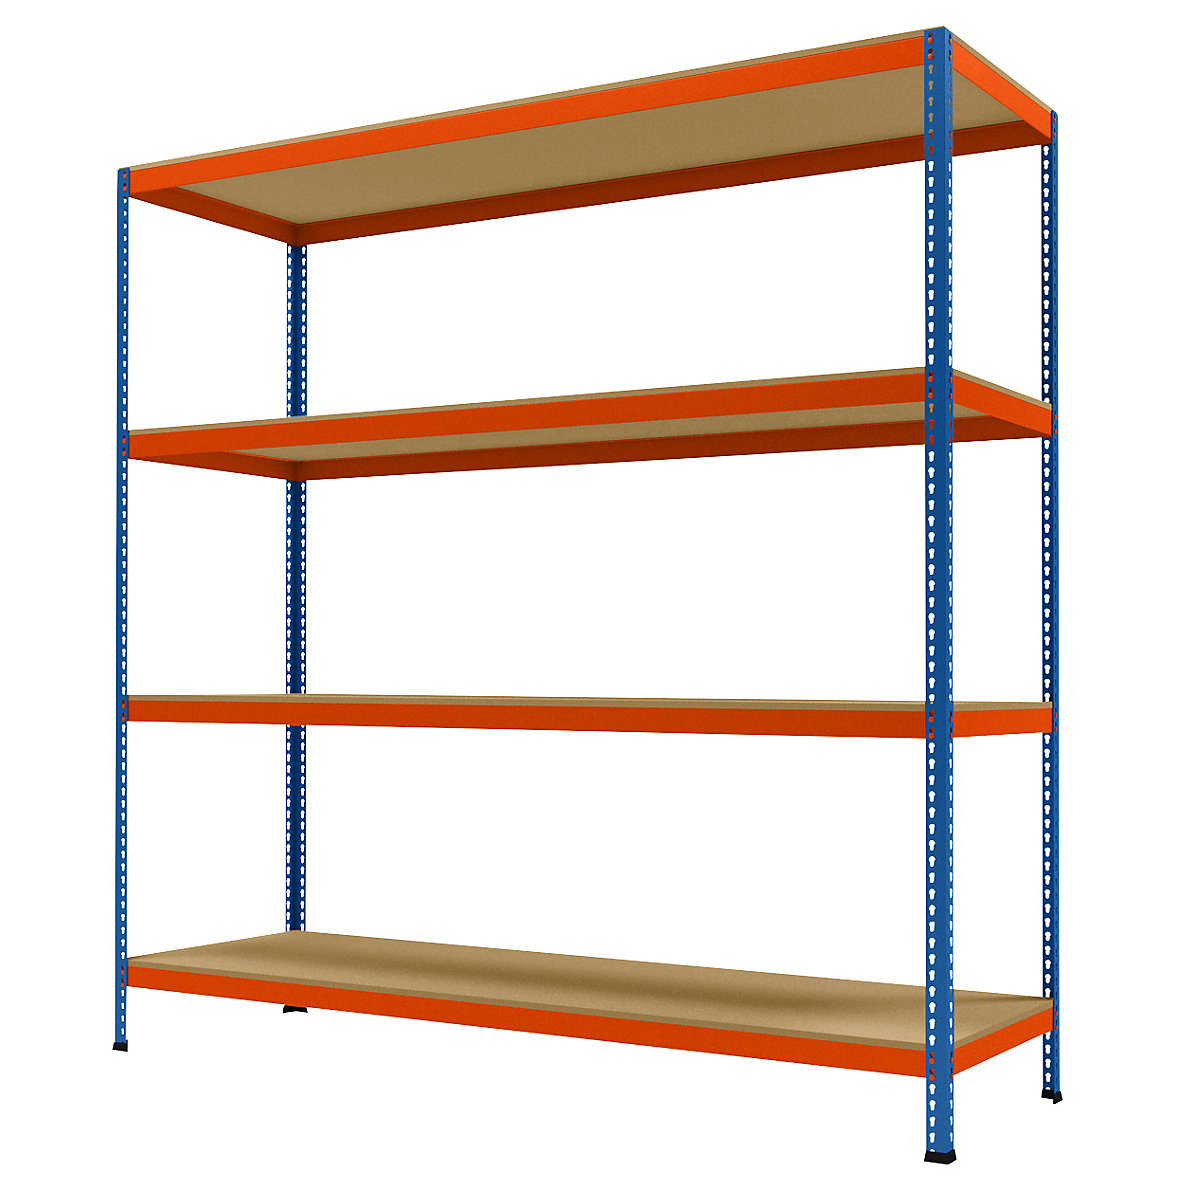 Wide span heavy duty shelving, height 2438 mm, overall depth 773 mm, width 2450 mm